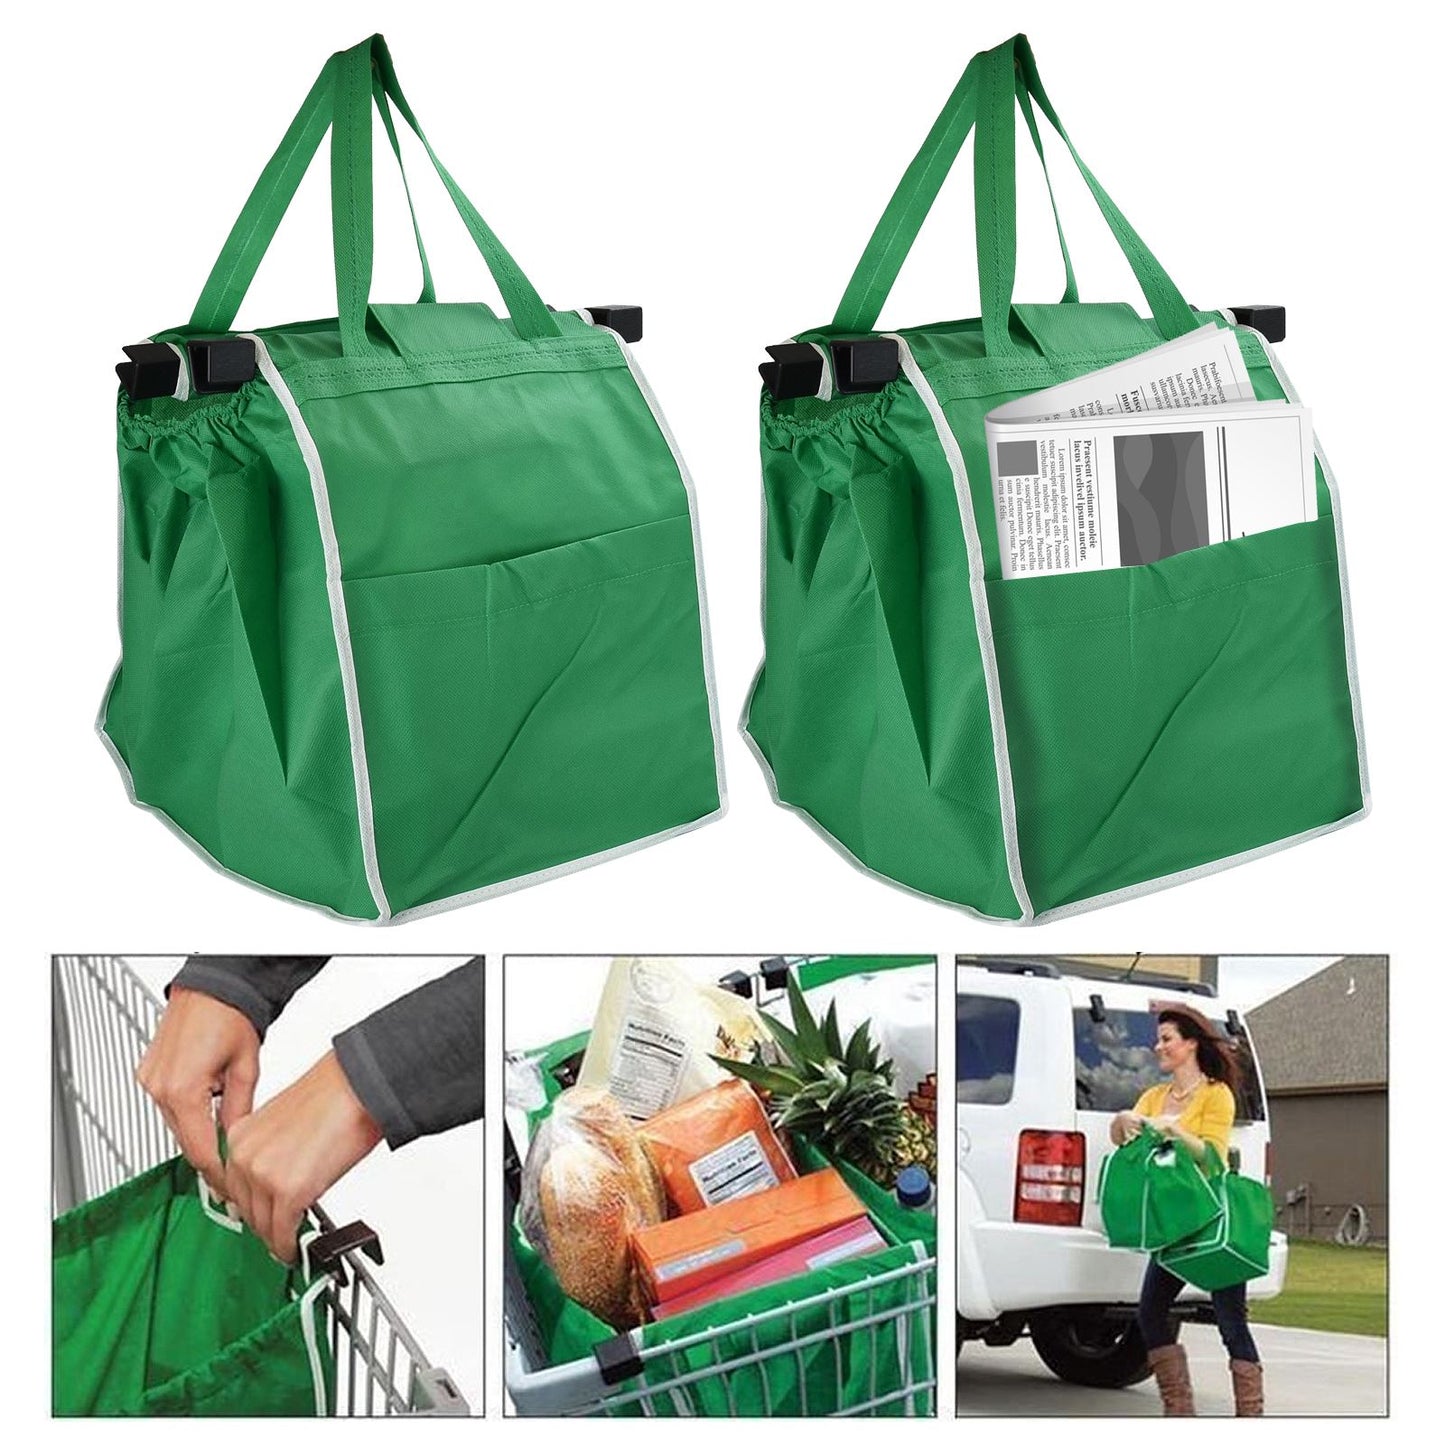 Convenient And Sturdy Shopping Trolleys For Easy Transport